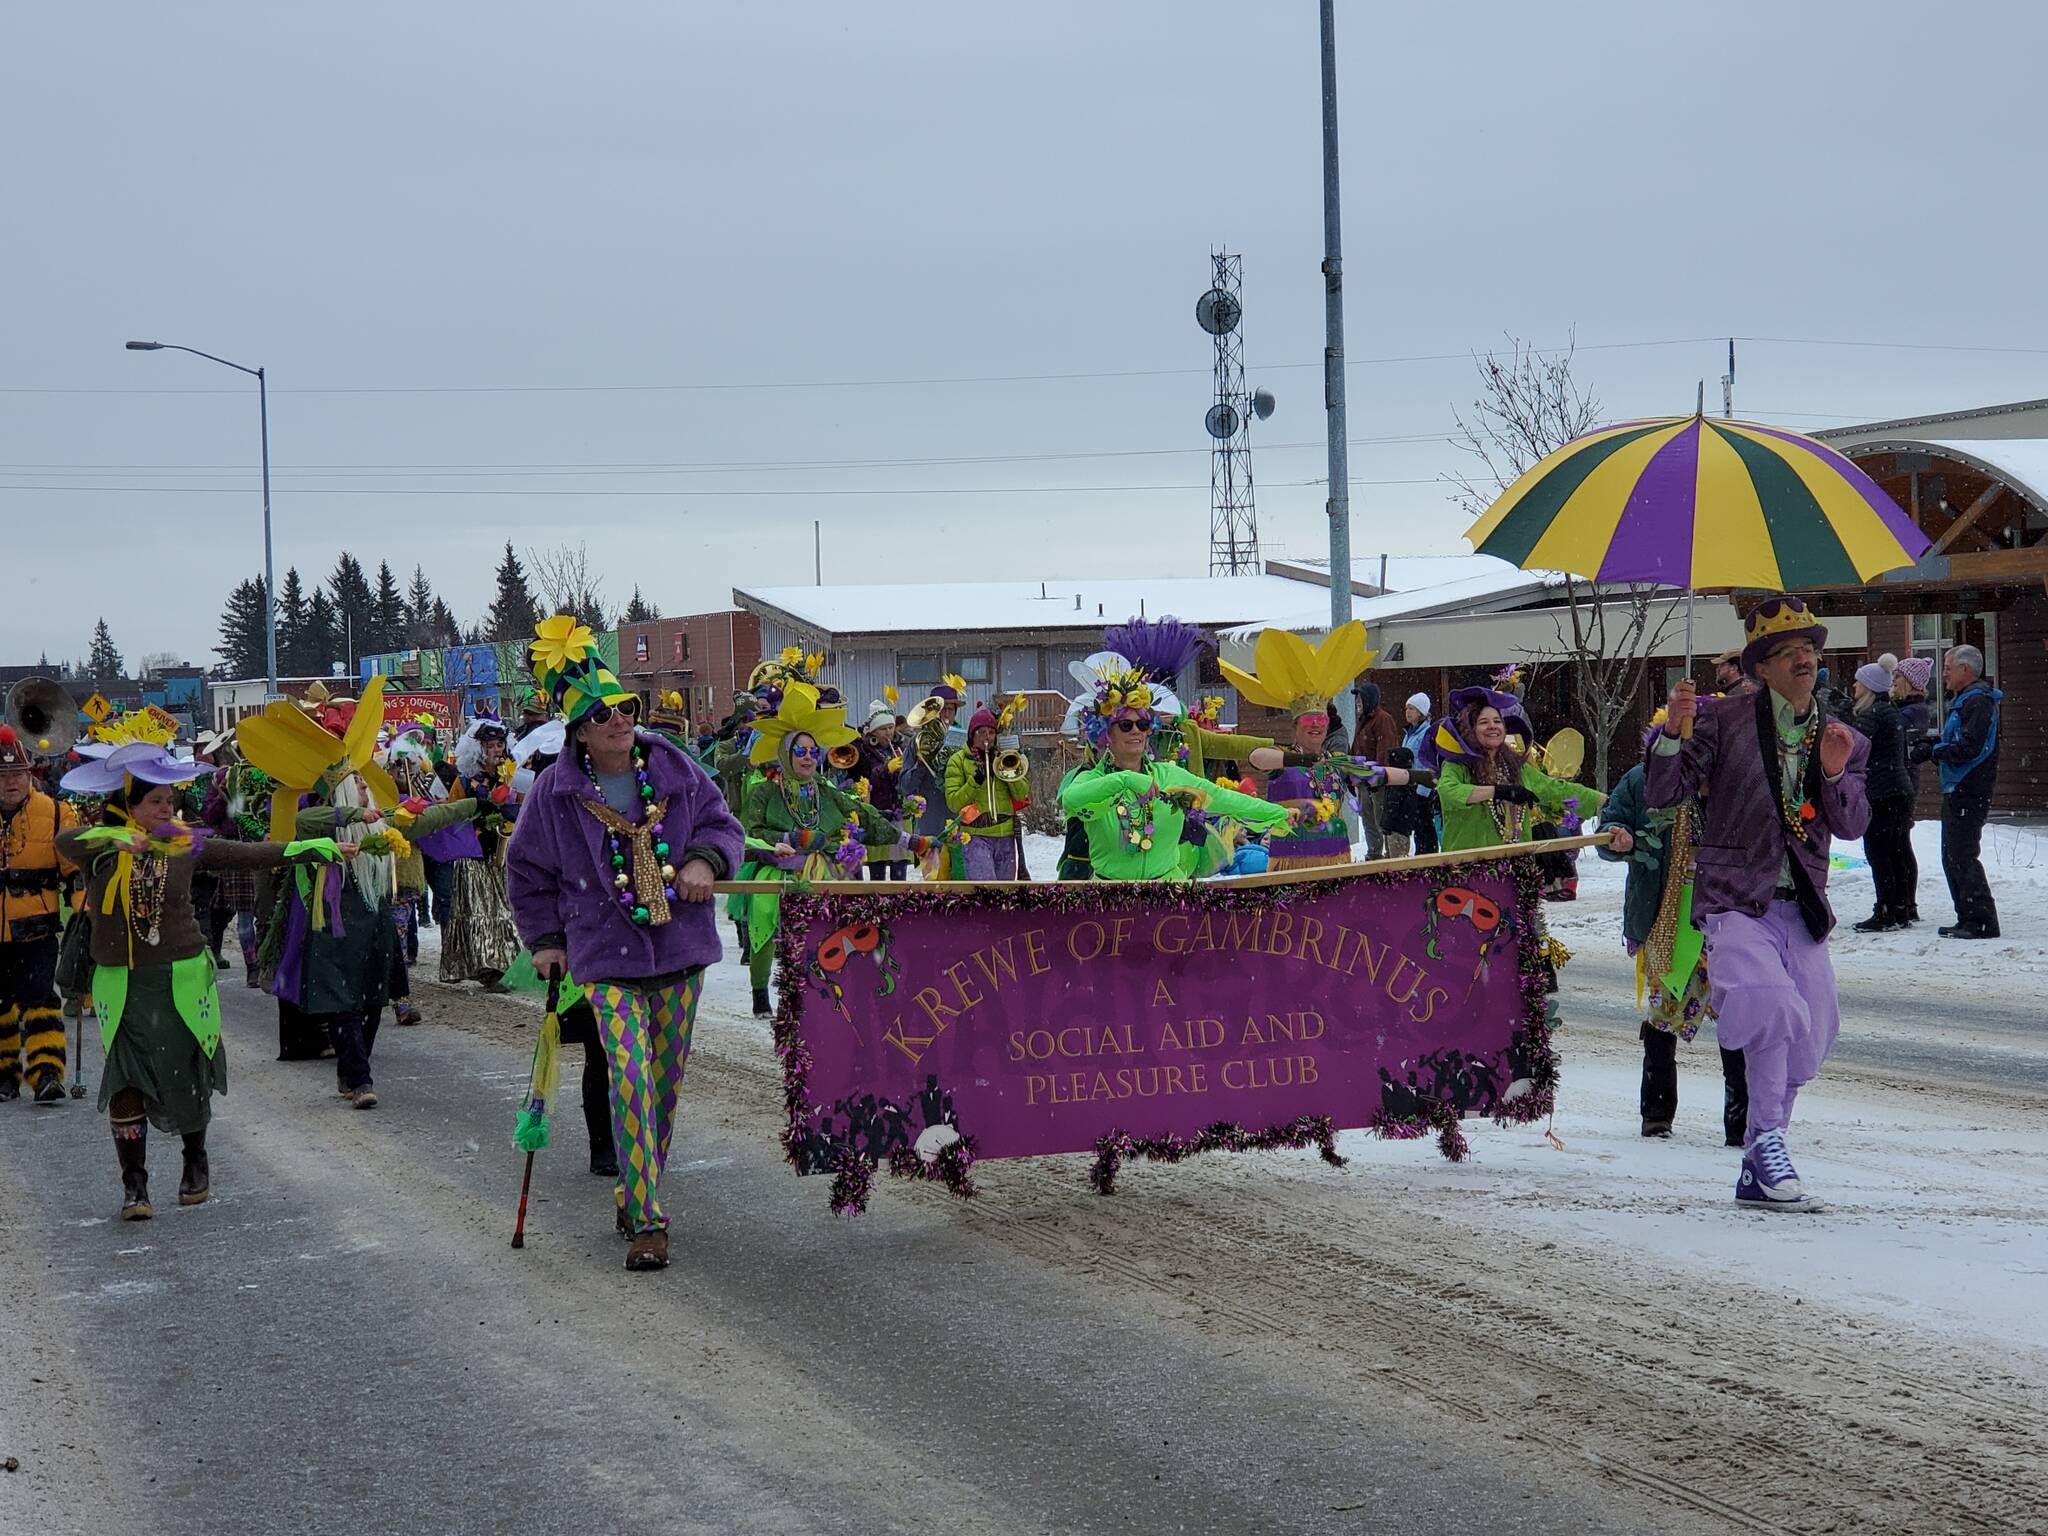 The Krewe of Gambrinus dances down Pioneer Avenue in the 69th Annual Winter Carnival Parade on Saturday, Feb. 11, 2023 in Homer, Alaska. Photo by Delcenia Cosman